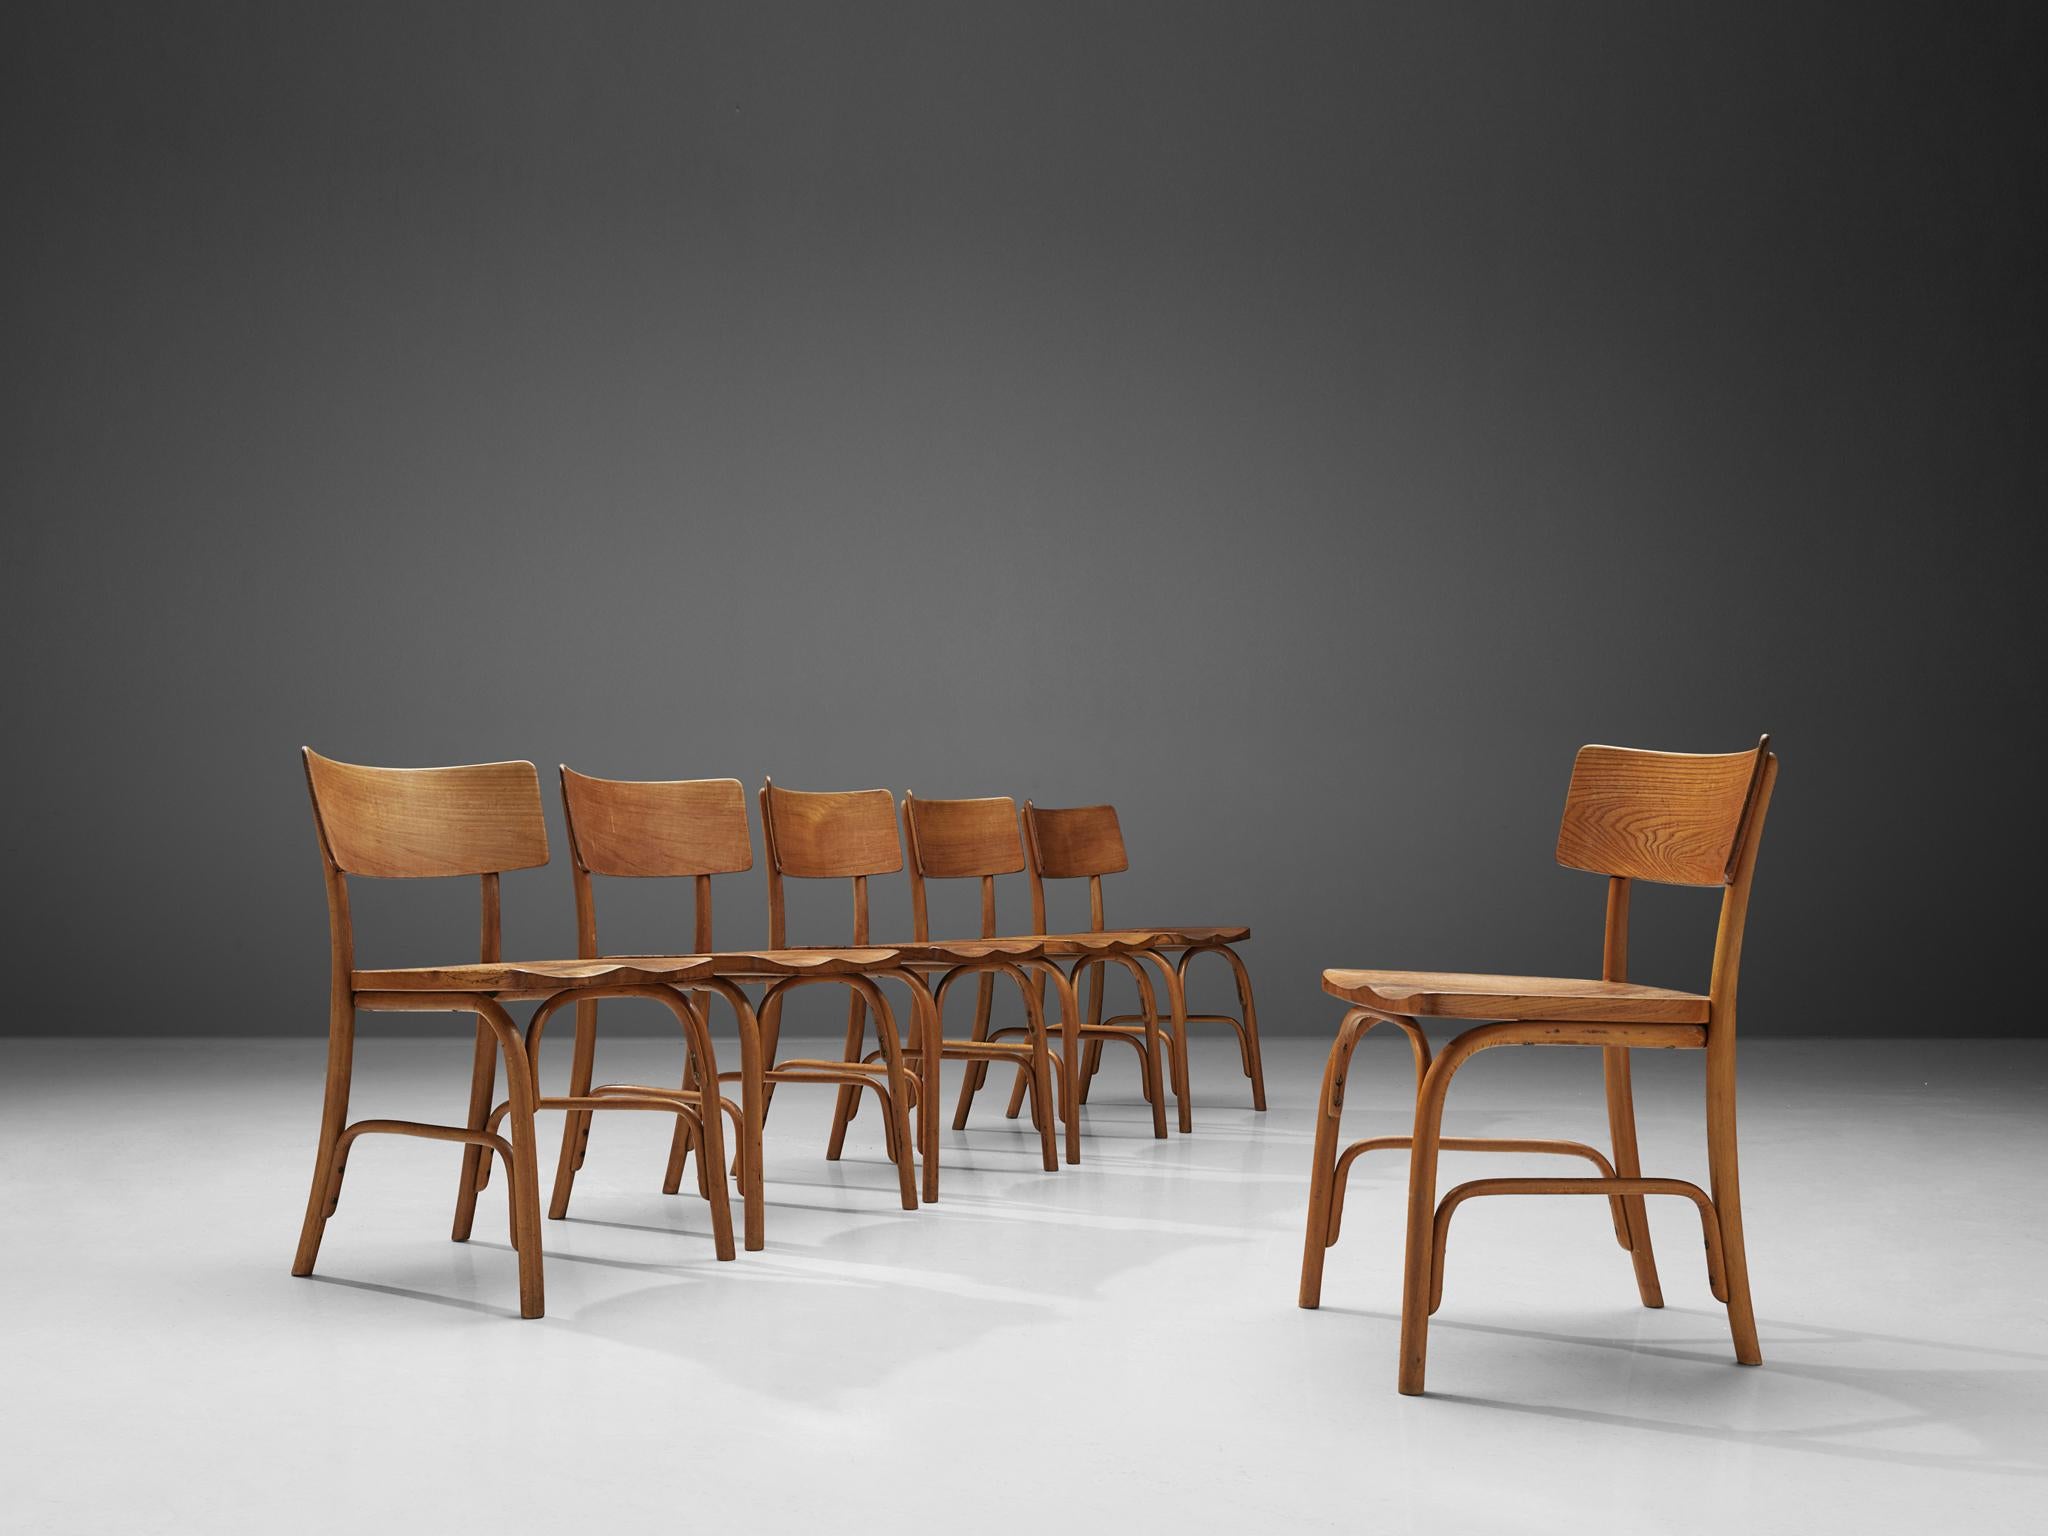 Frits Schlegel for Fritz Hansen, set of six 'Husum' chairs, elm, beech. Denmark, 1930

Danish designer Frits Schlegel created the 'Husum' chair which got manufactured by Fritz Hansen in different editions. This model made out of elm and beech